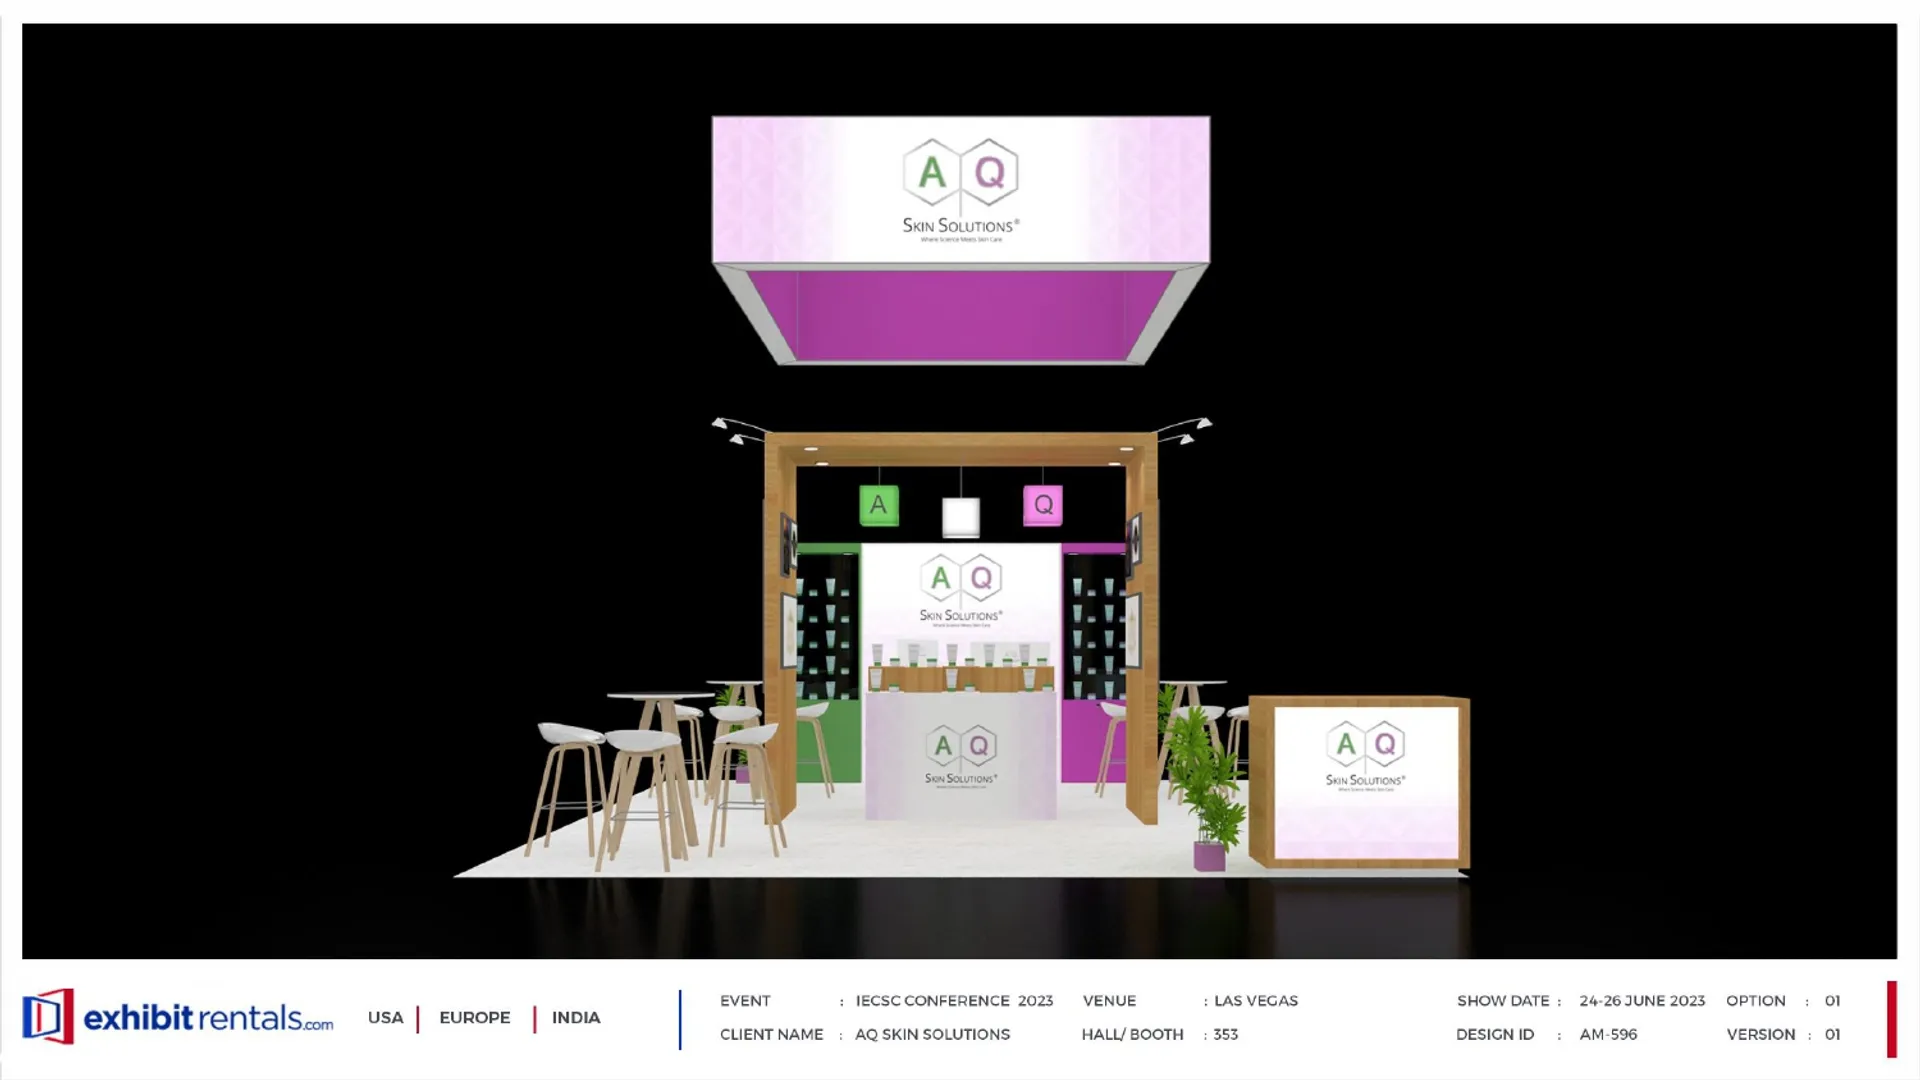 booth-design-projects/Exhibit-Rentals/2024-04-18-20x20-ISLAND-Project-85/1.1_AQ Skin Solutions_IECSC Conference_ER design proposal -14_page-0001-tar8b.jpg